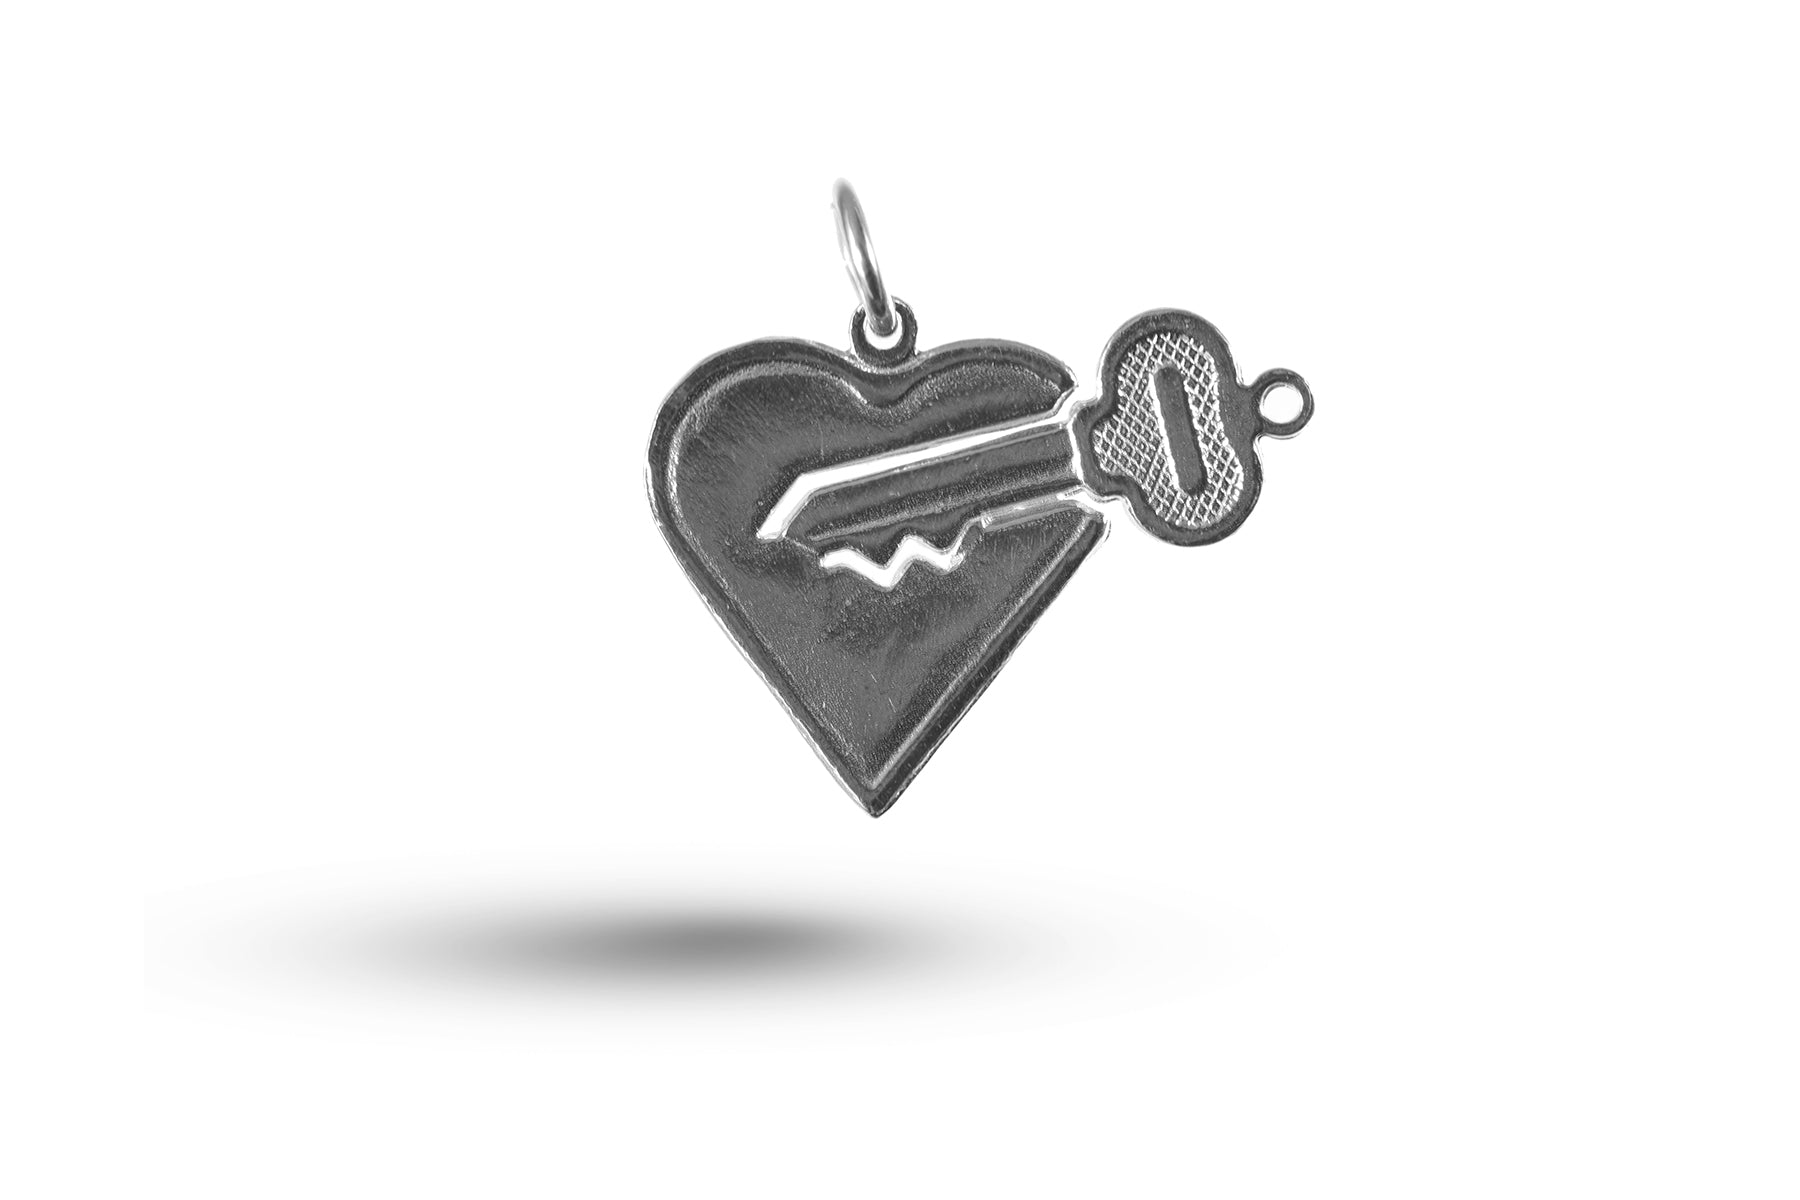 White gold Heart and Key charm.